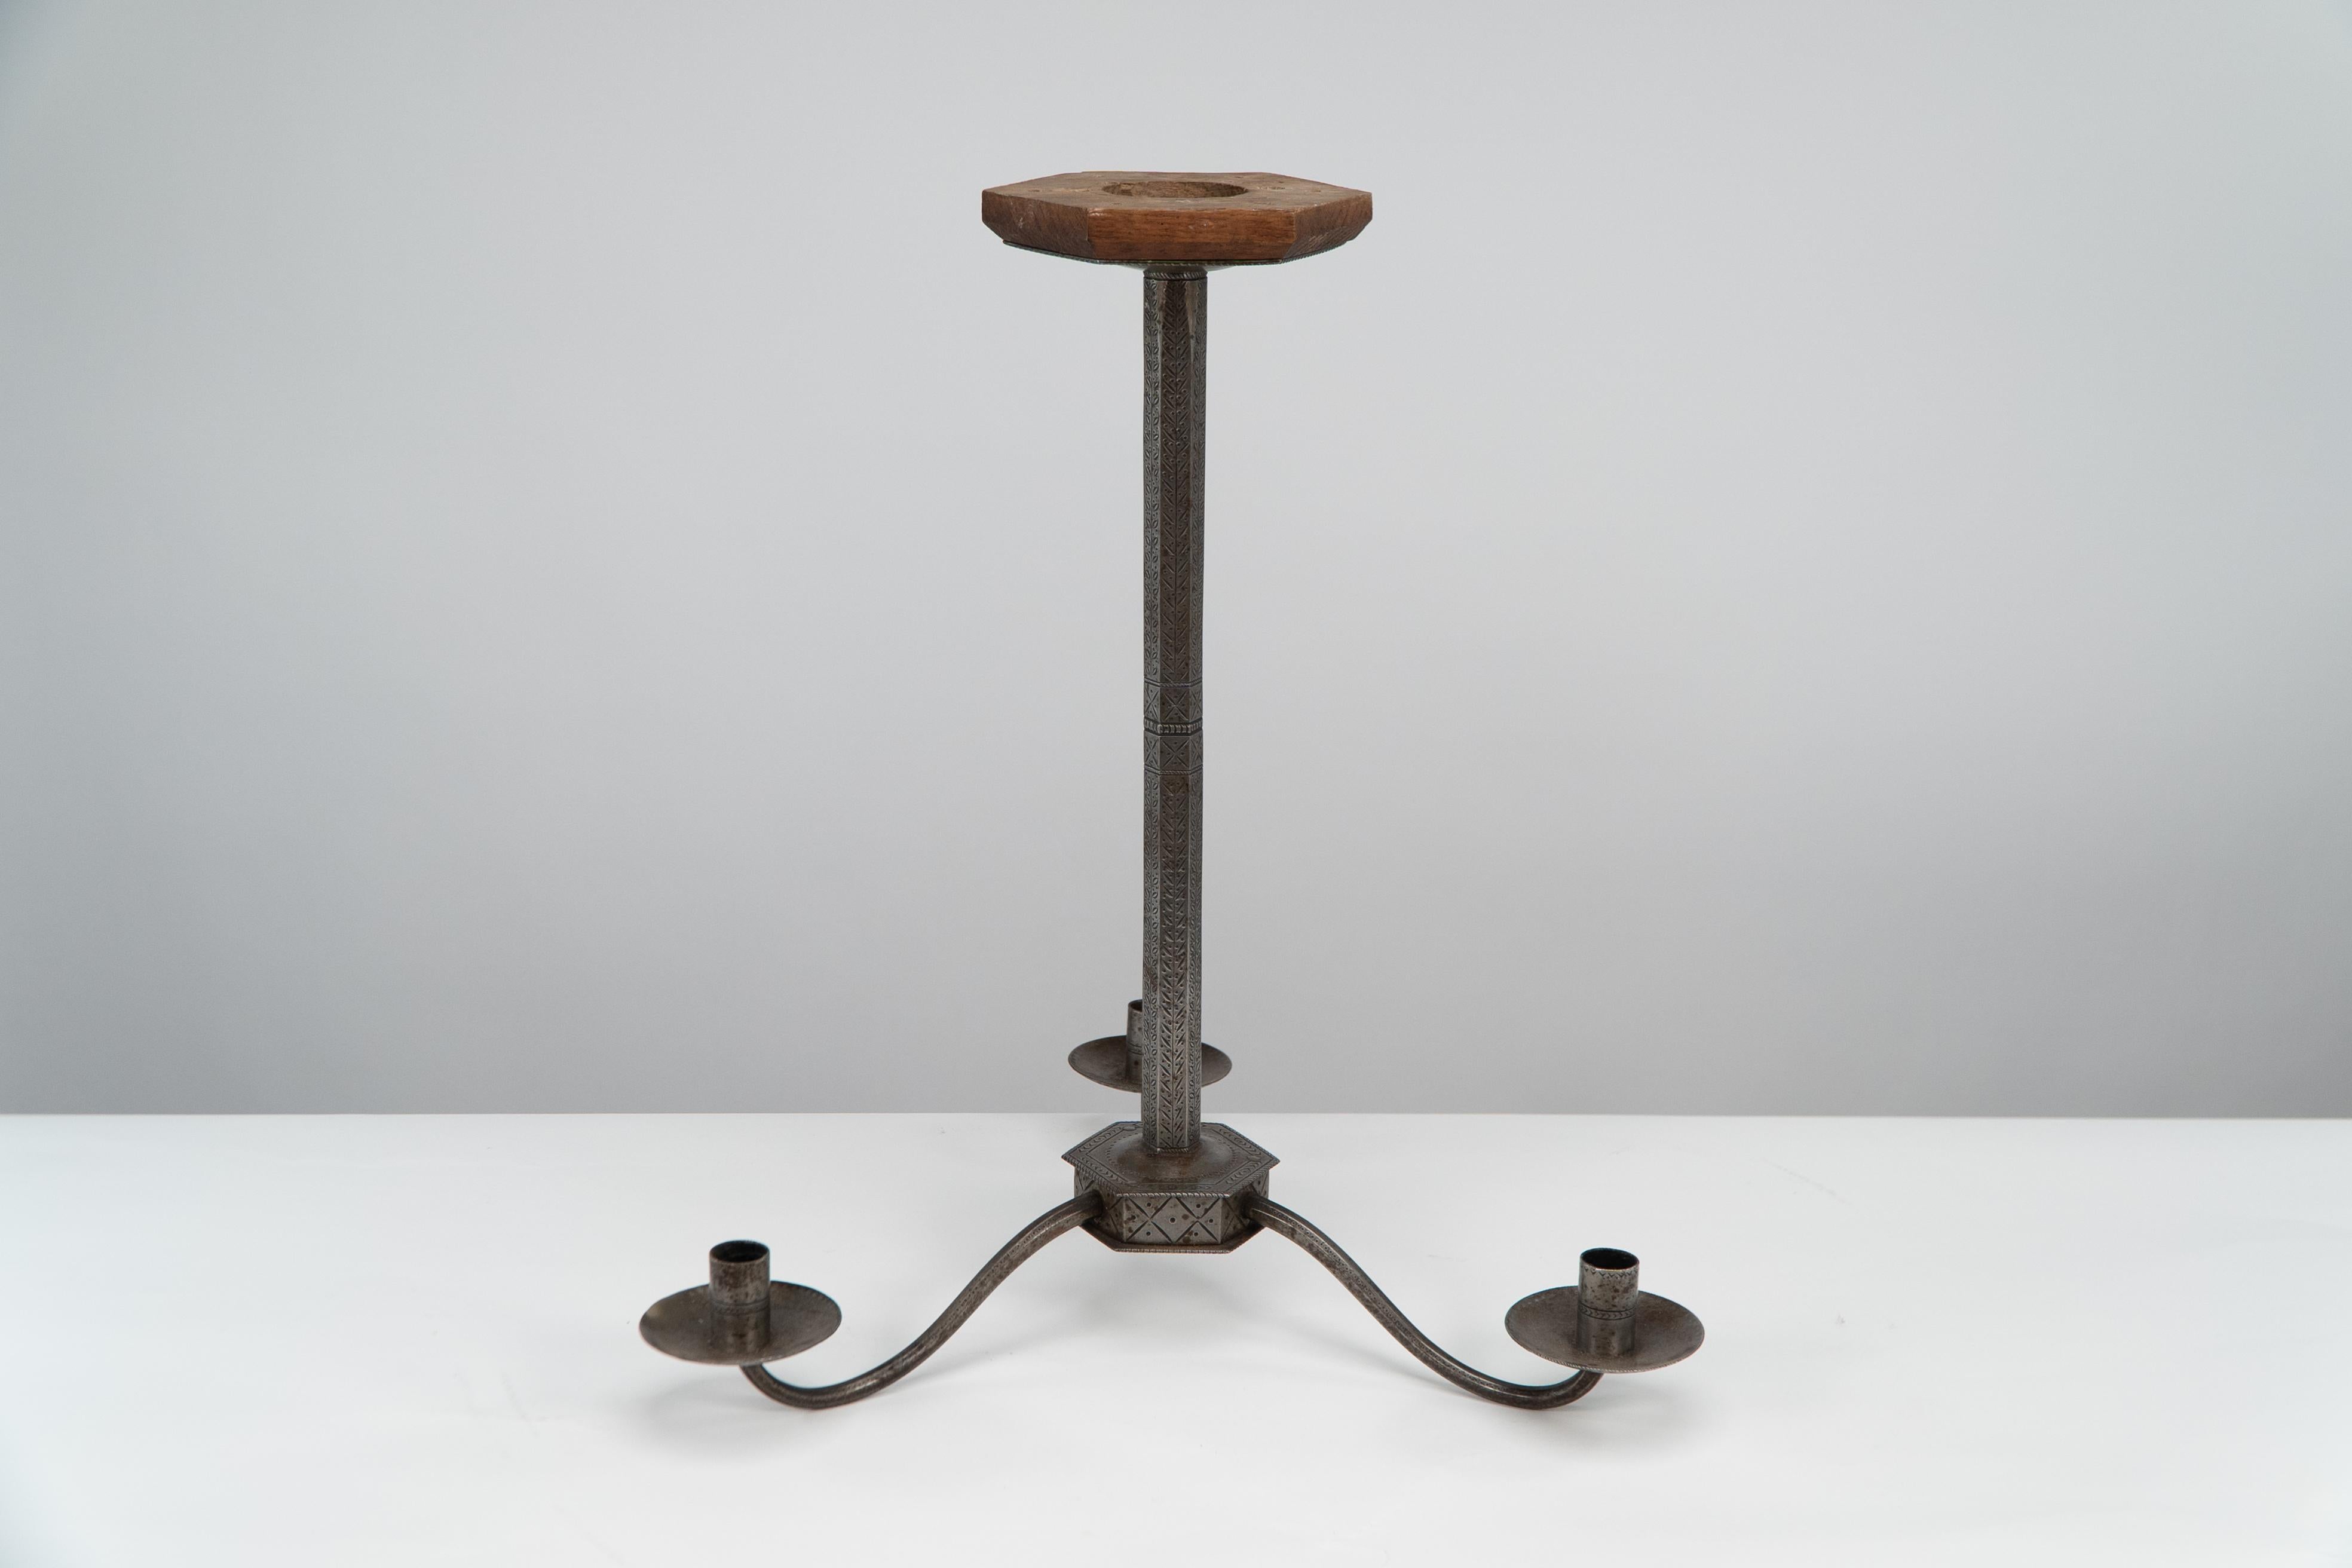 Alfred Bucknell. A hand-formed and finely crafted Arts & Crafts steel ceiling candelabra from Painswick House Sapperton. 